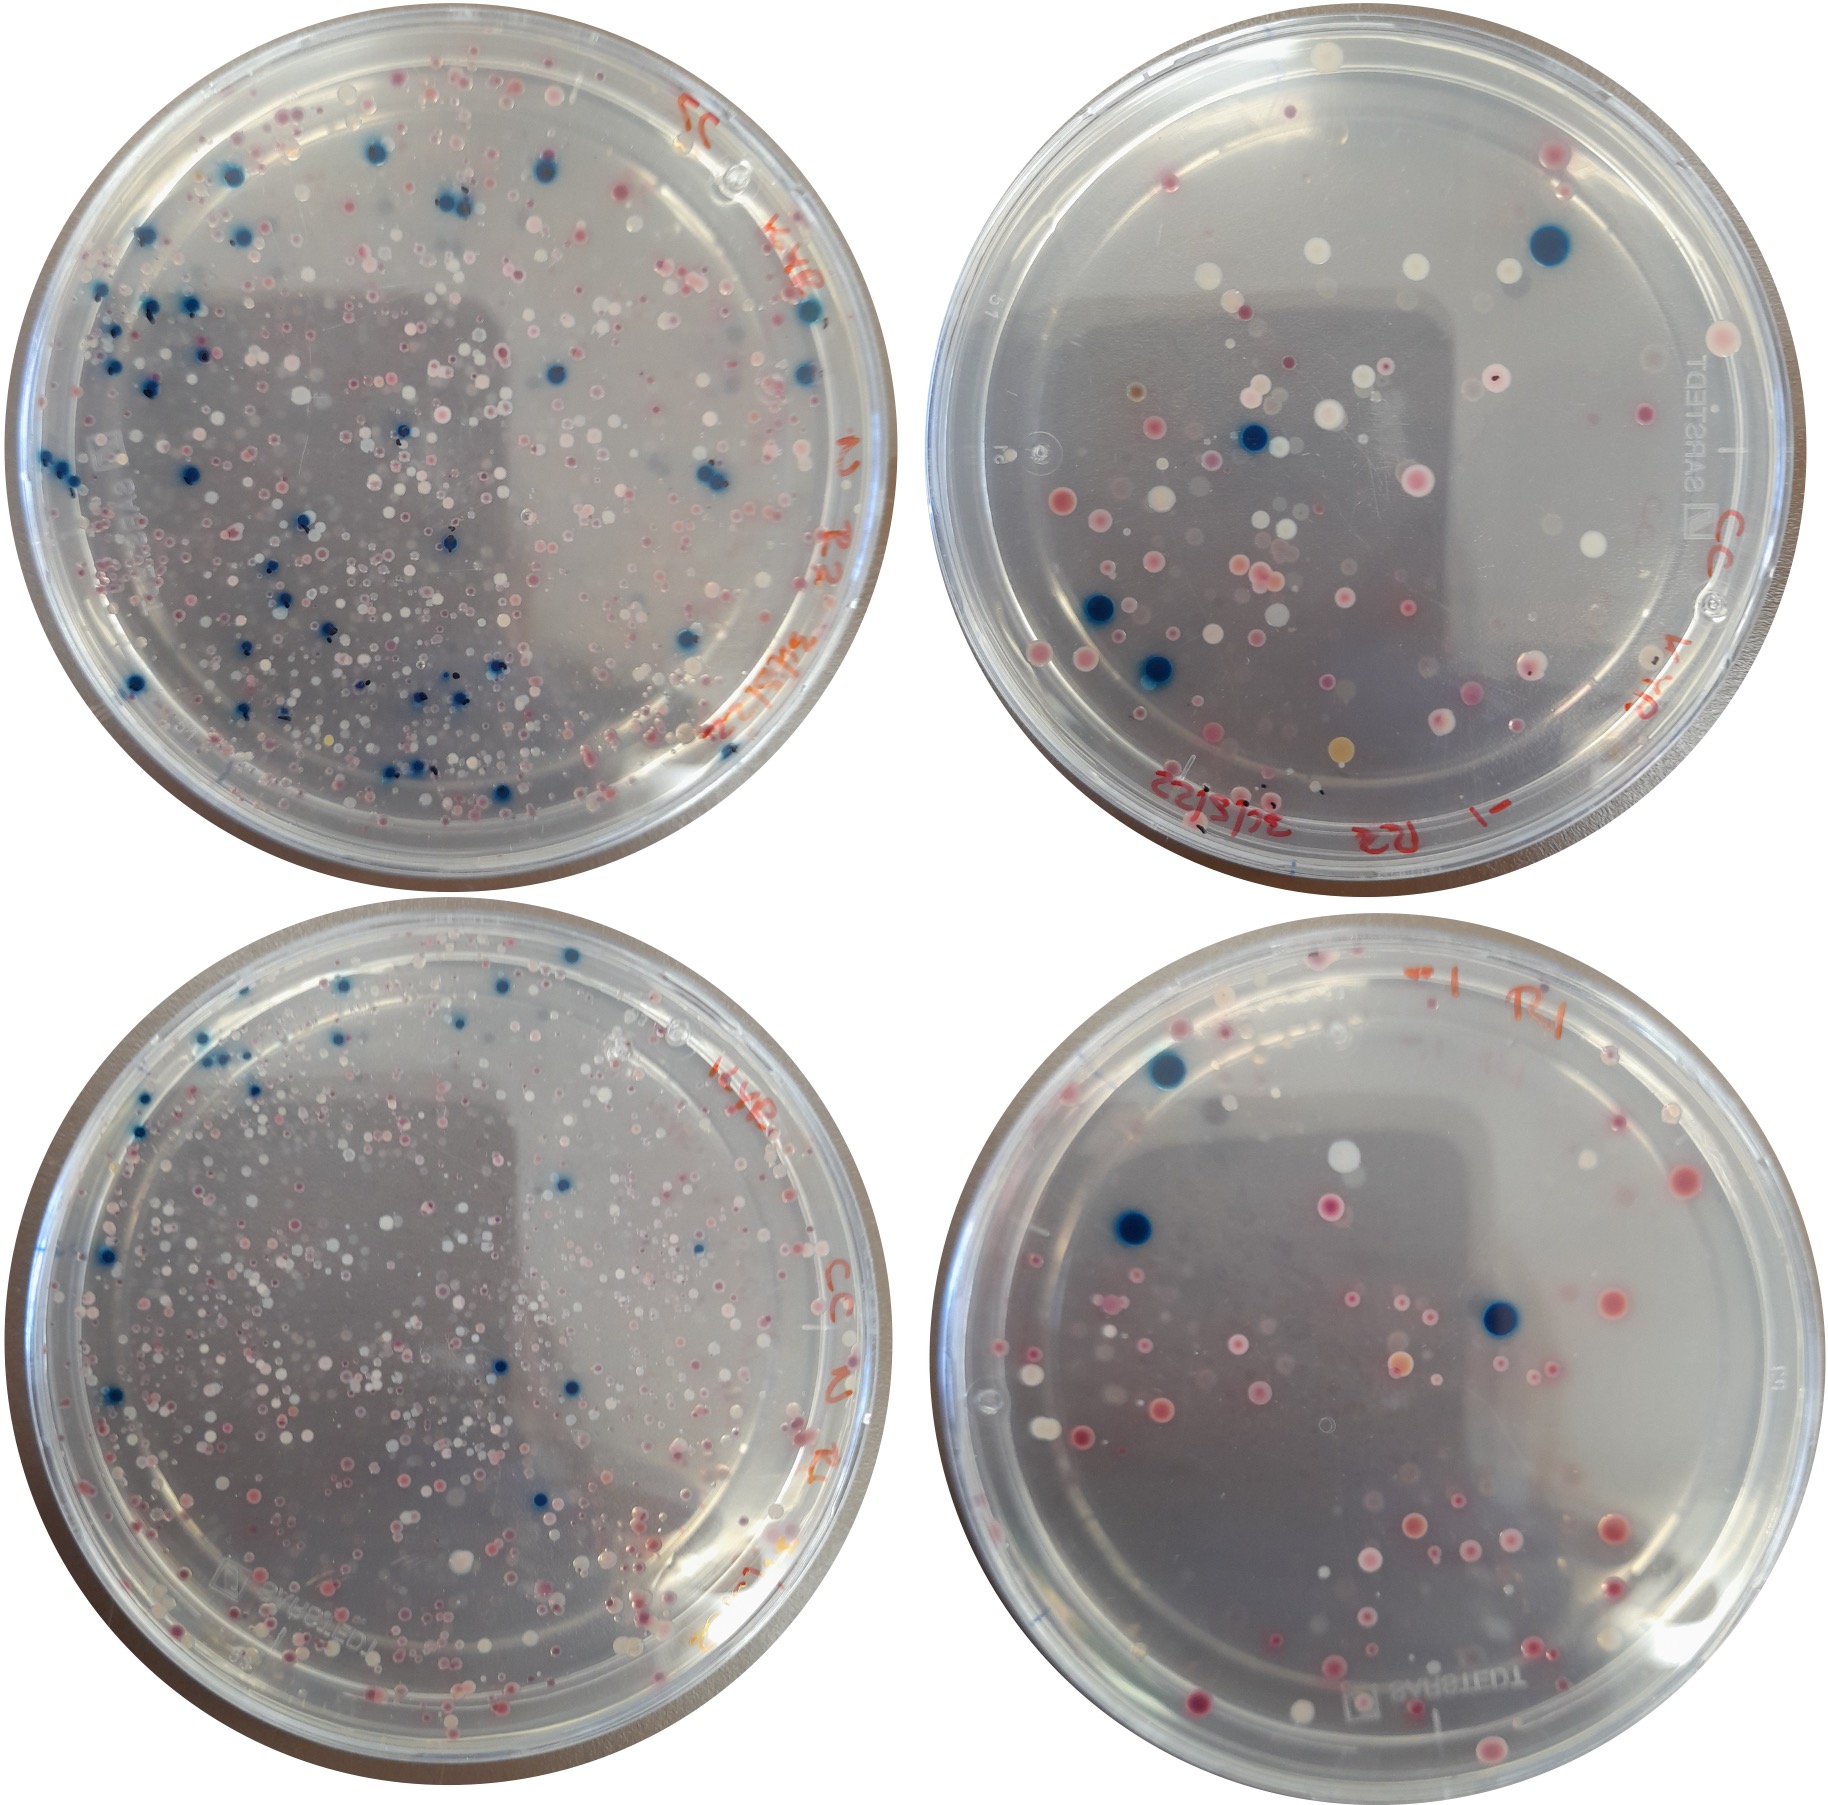 Isolation of E.coli bacteria from river water